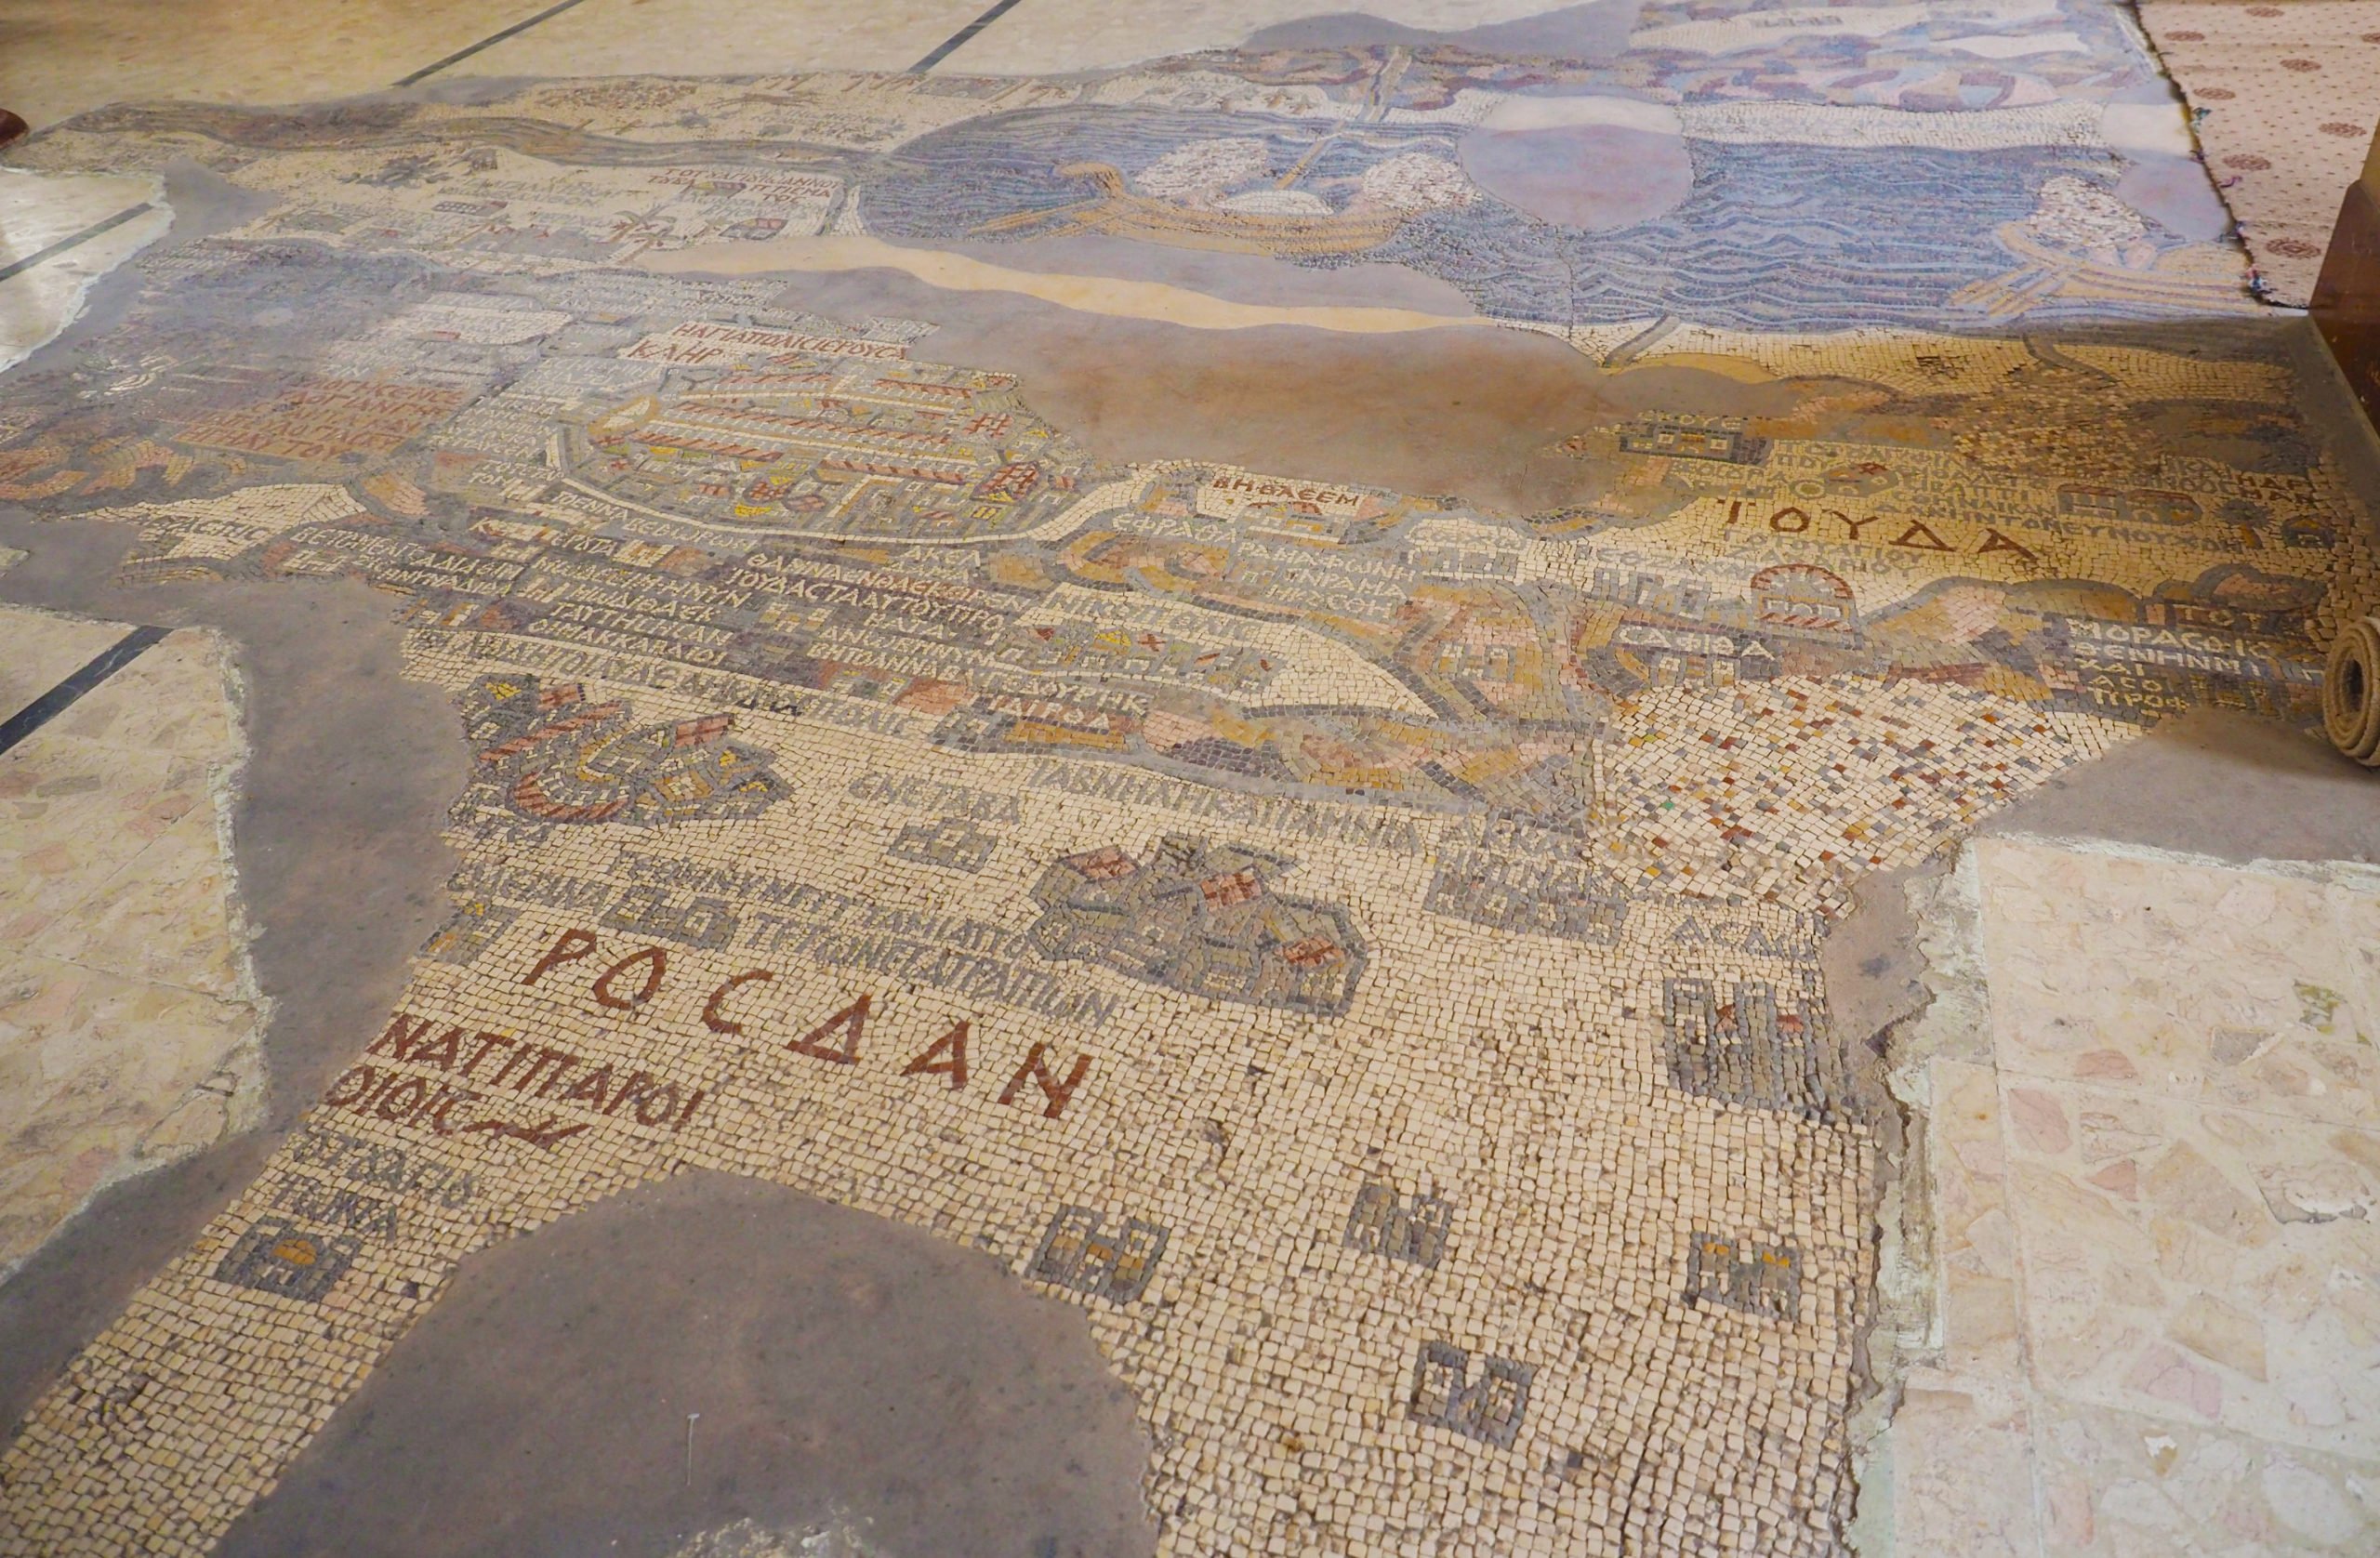 Discover The Famous Mosaic At Madaba On The Amman, Madaba, Mount Nebo, Dead Sea Day Tour From Amman